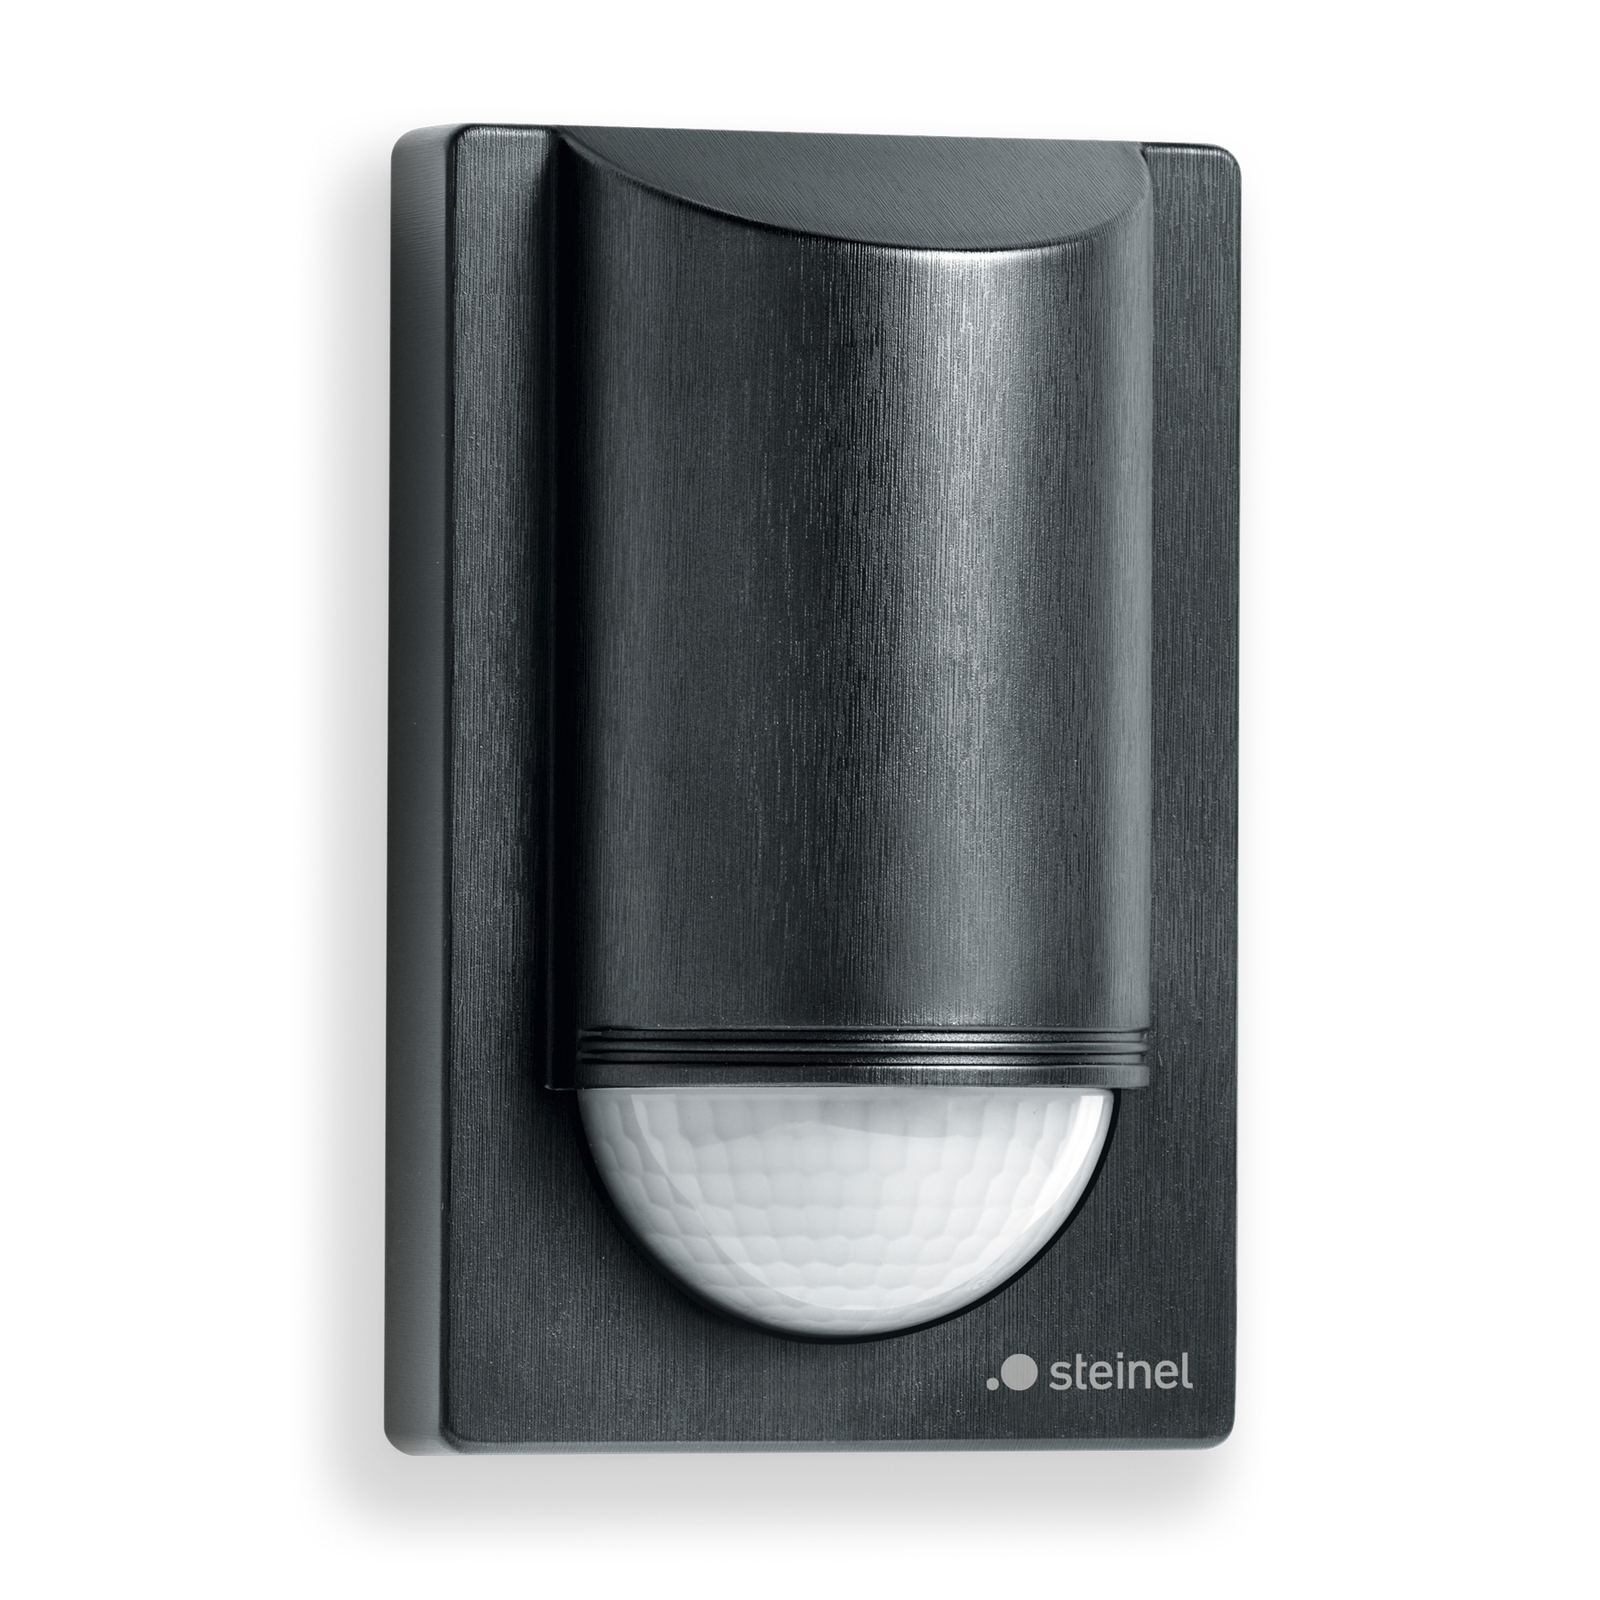 STEINEL IS 2180 ECO motion detector, black